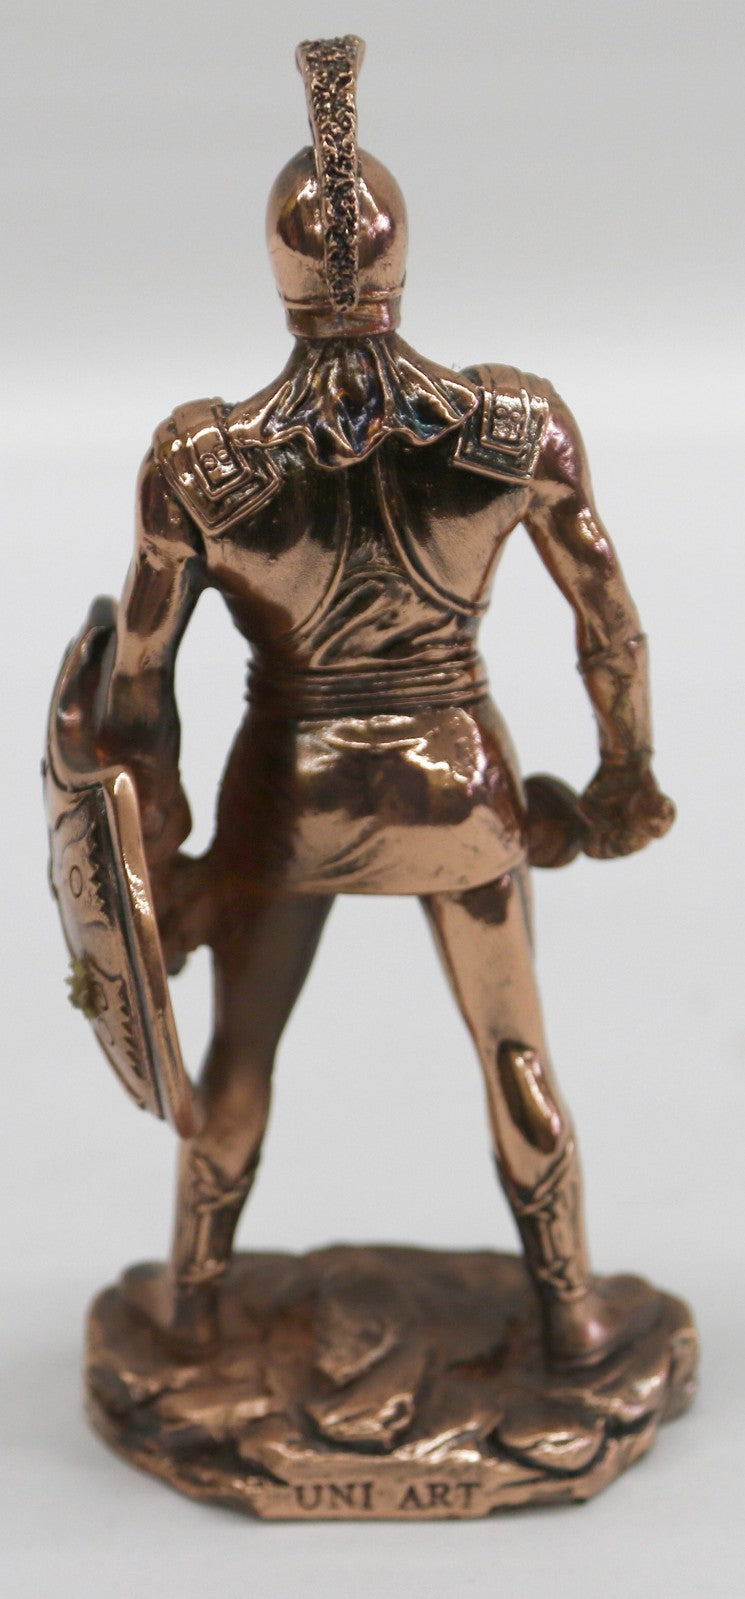 Warrior from the movie “The 300” ANCIENT GREECE WARRIOR STATUE FIGURINE DECOR